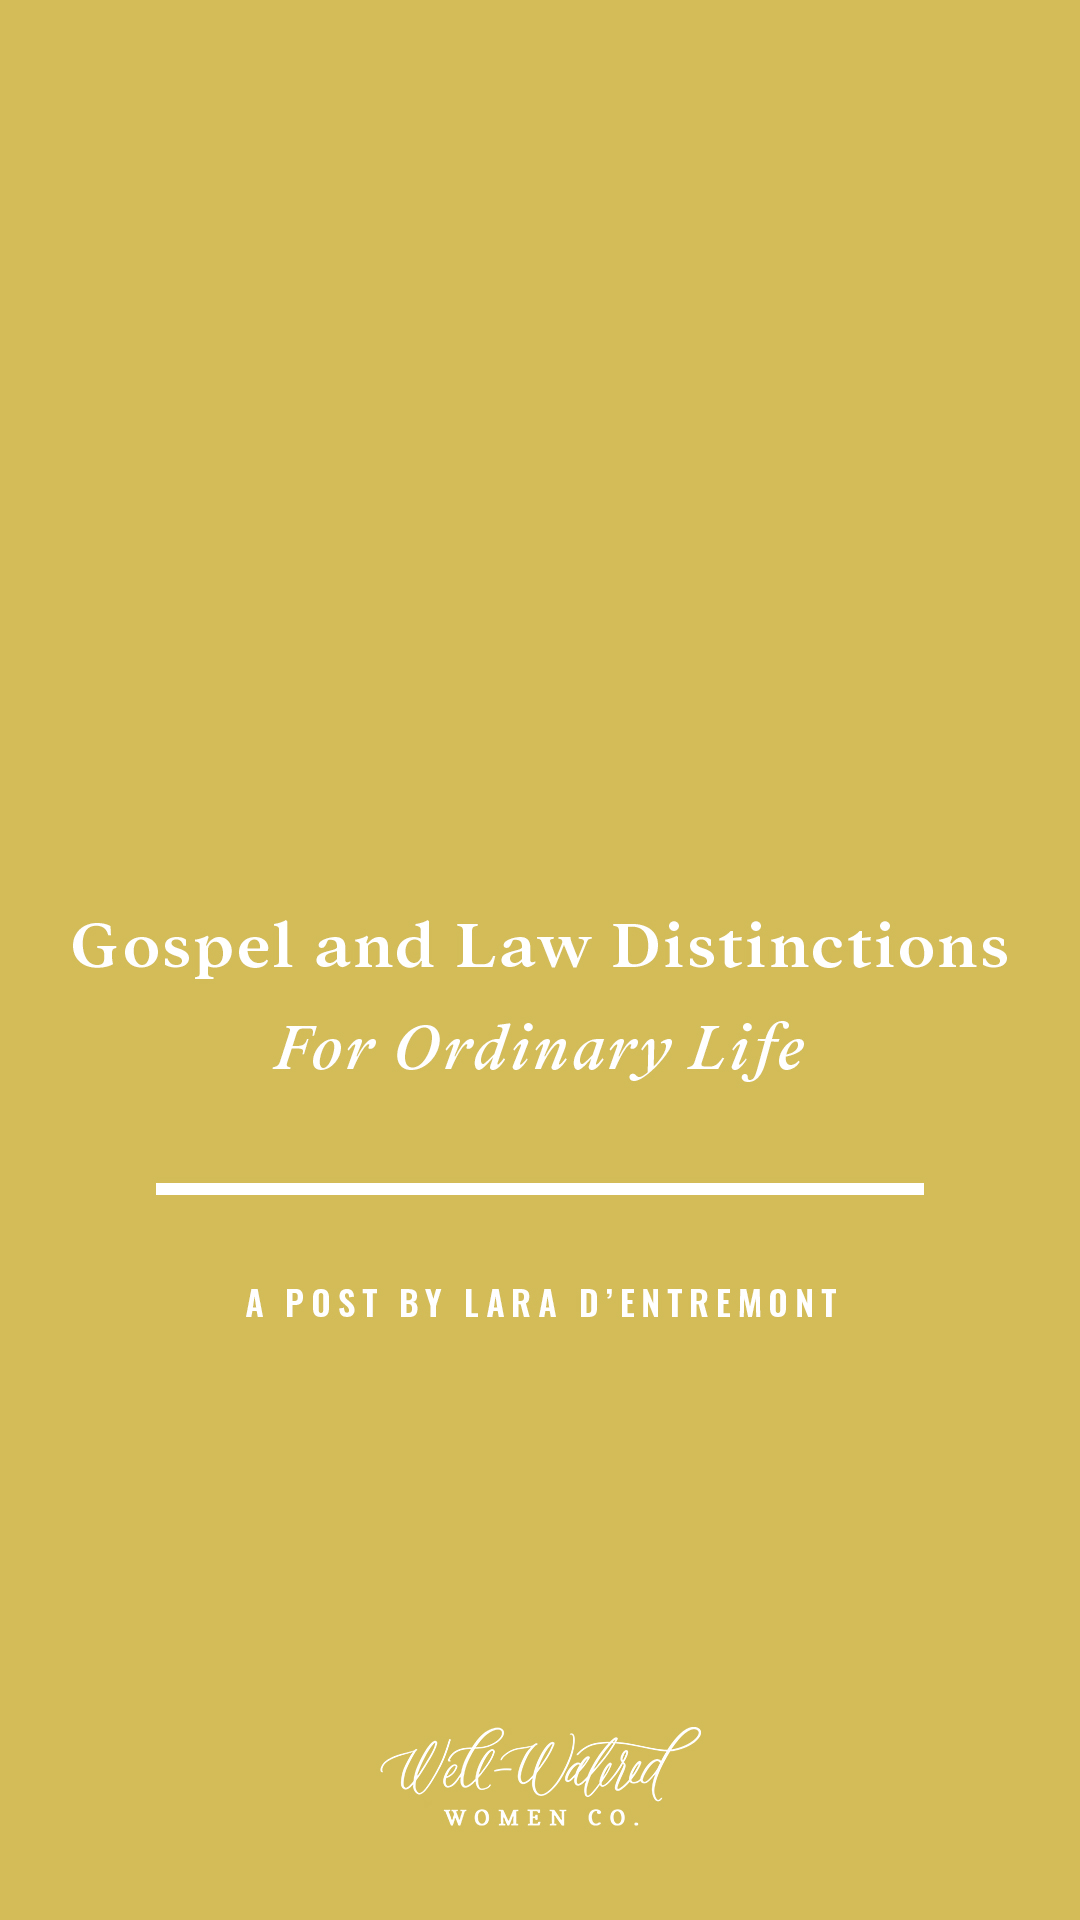 Well-Watered Women Blog - Gospel and Law Distinctions for Ordinary Life - by Lara D'Entremont